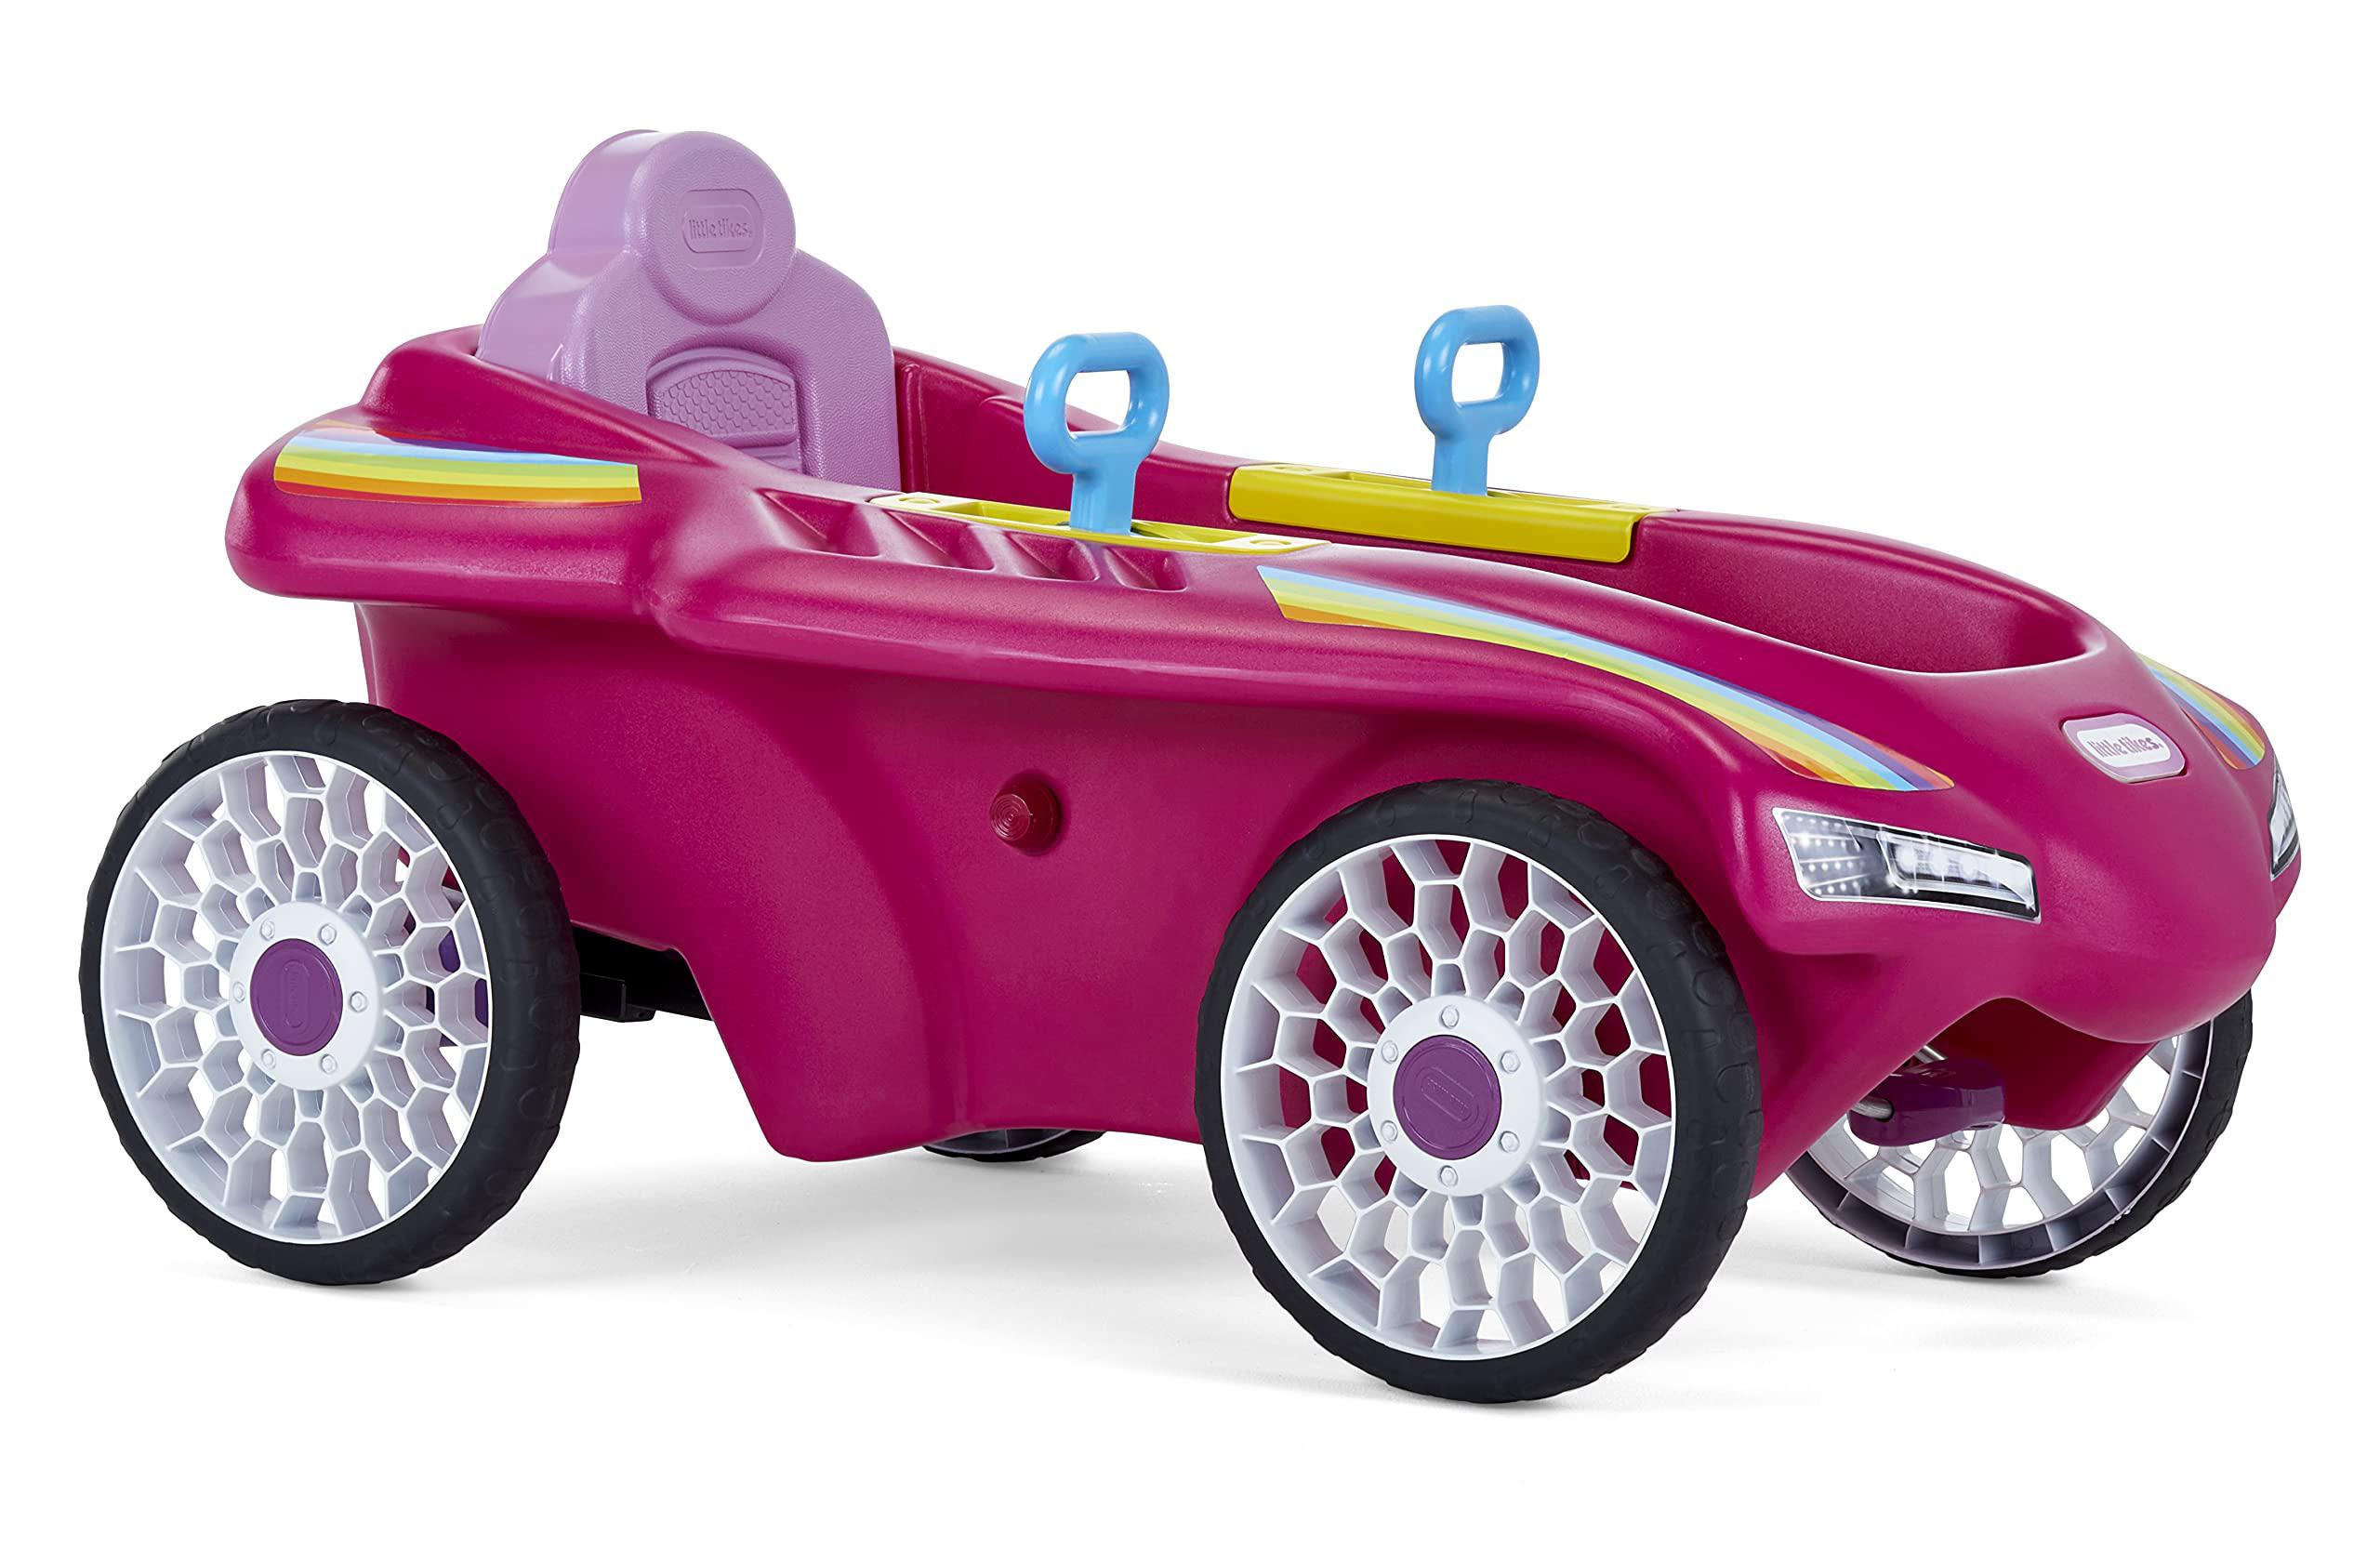 little tikes jett car racer pink, ride on car with adjustable seat back, dual handle rear wheel steering, racing control, kid